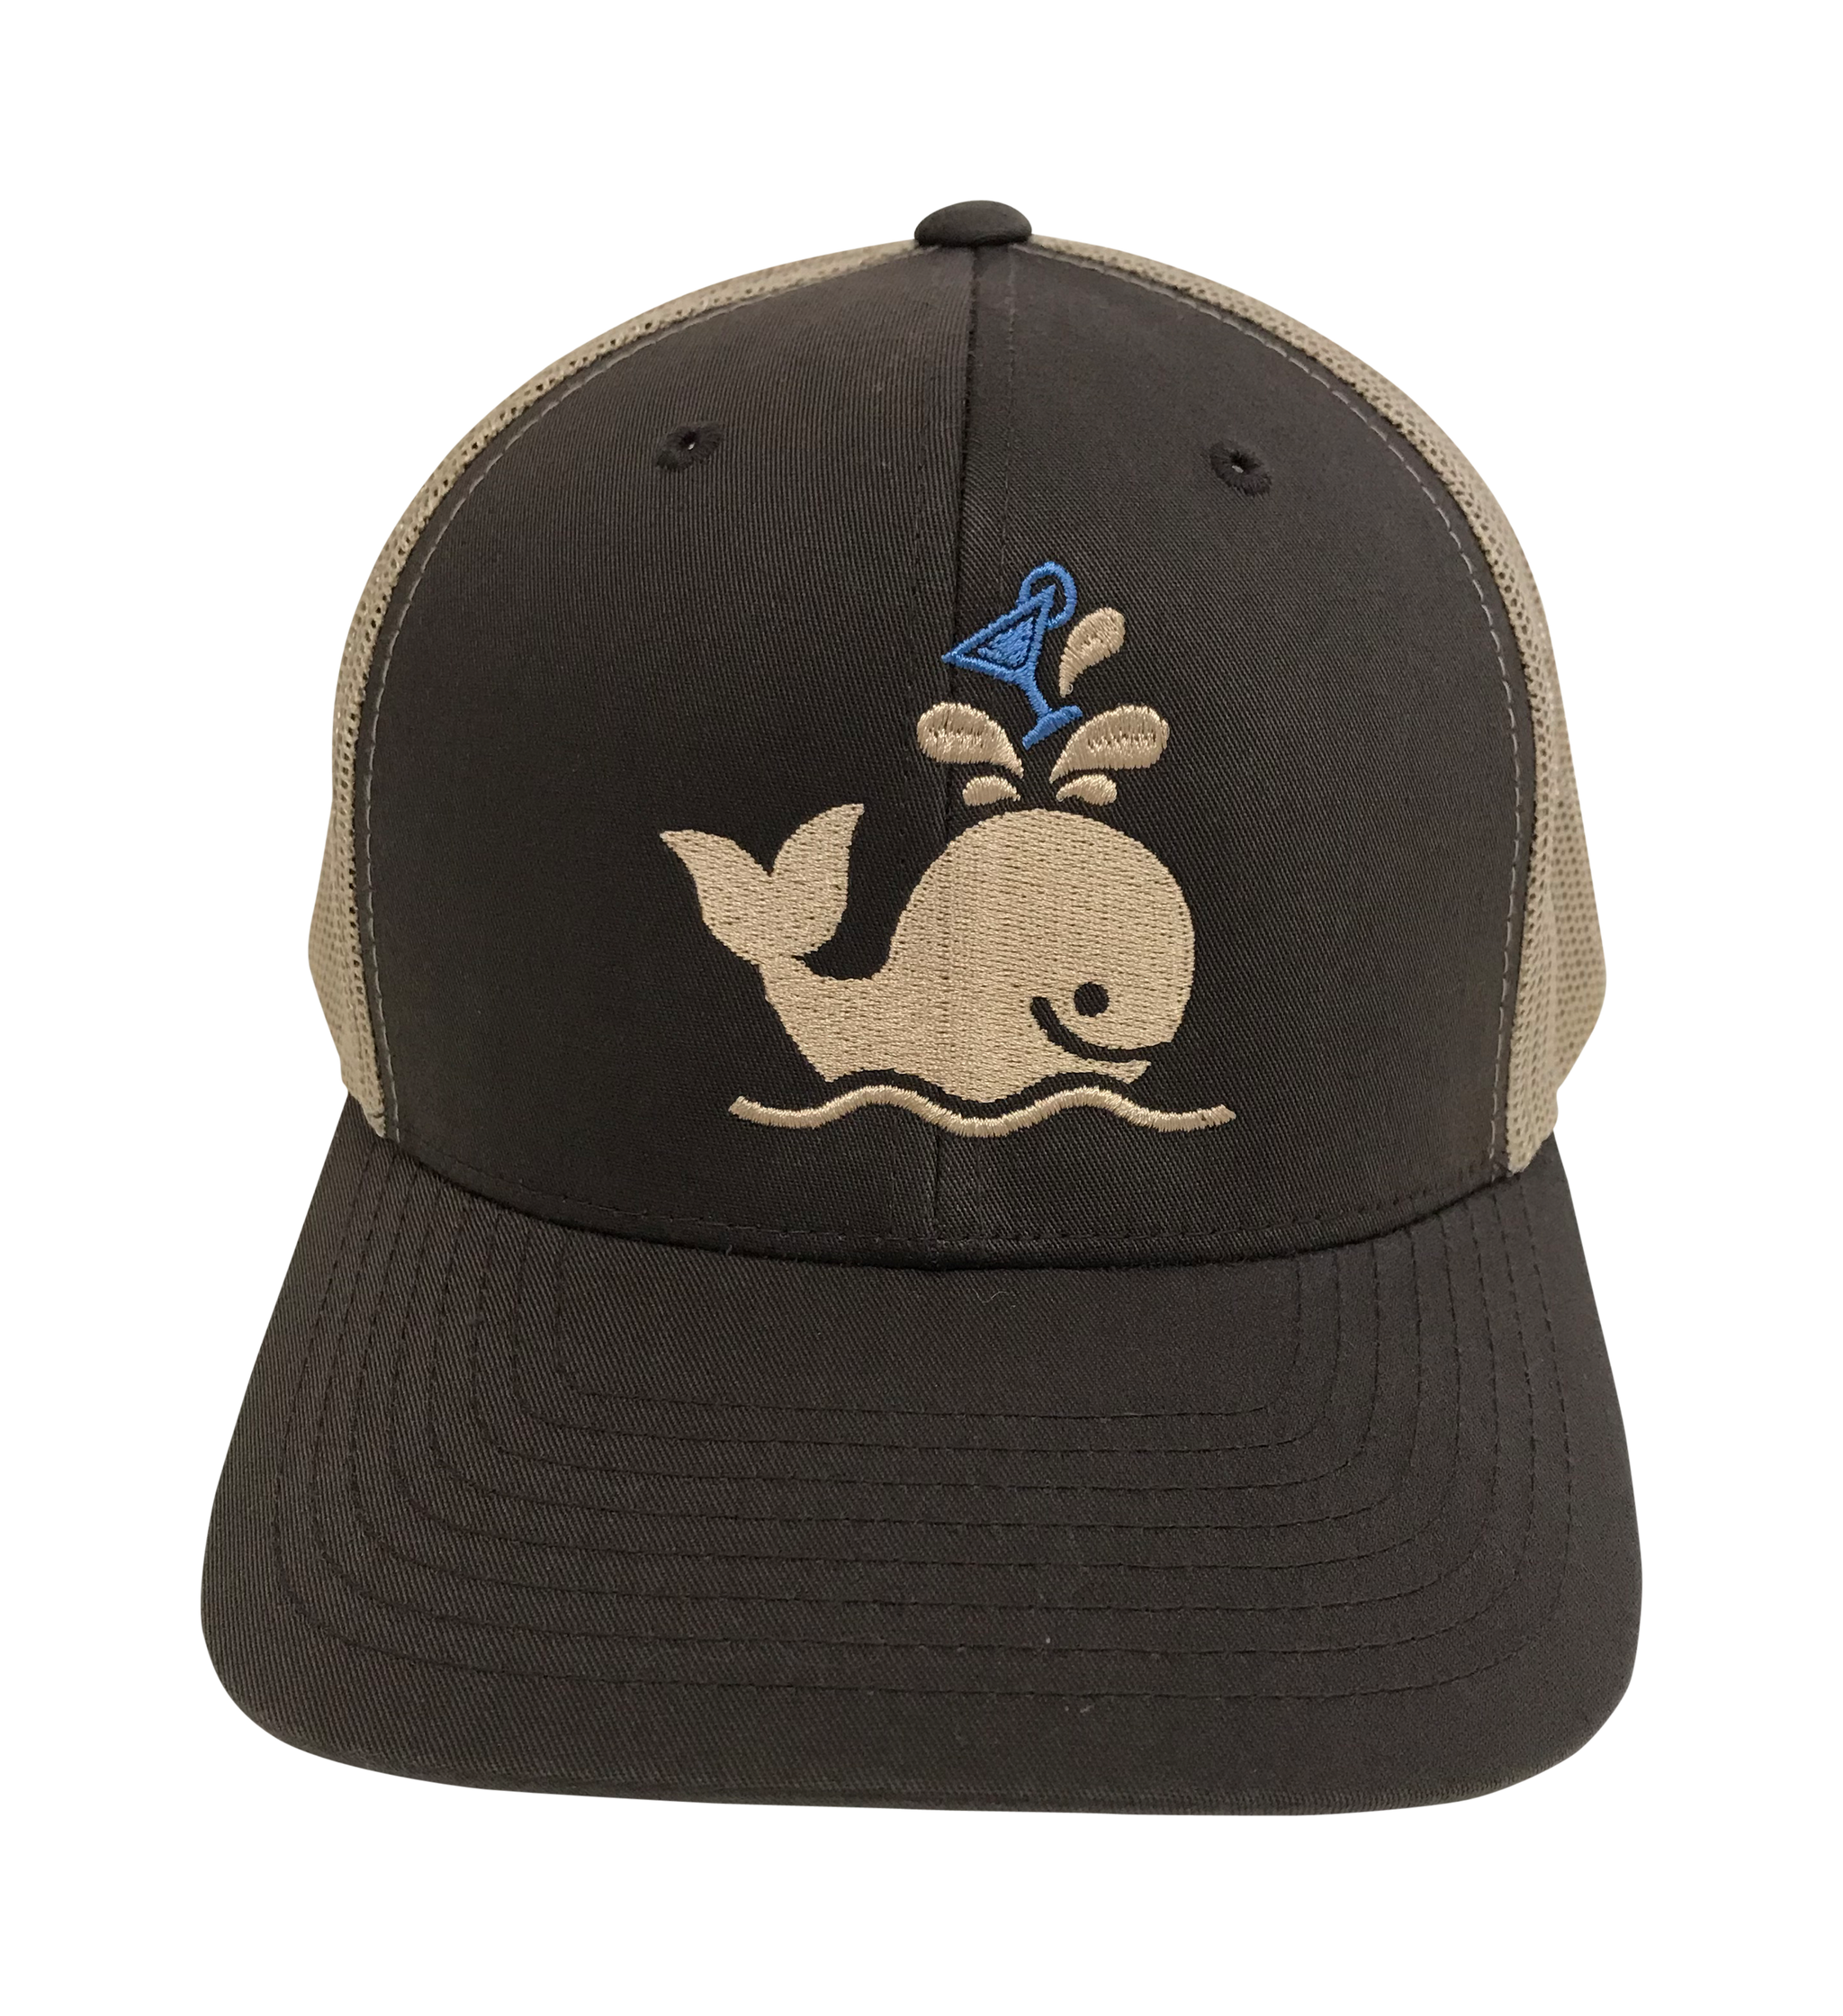 Island Smilin' Spout the Martini Whale Embroidered Trucker Hat - Brown/Tan